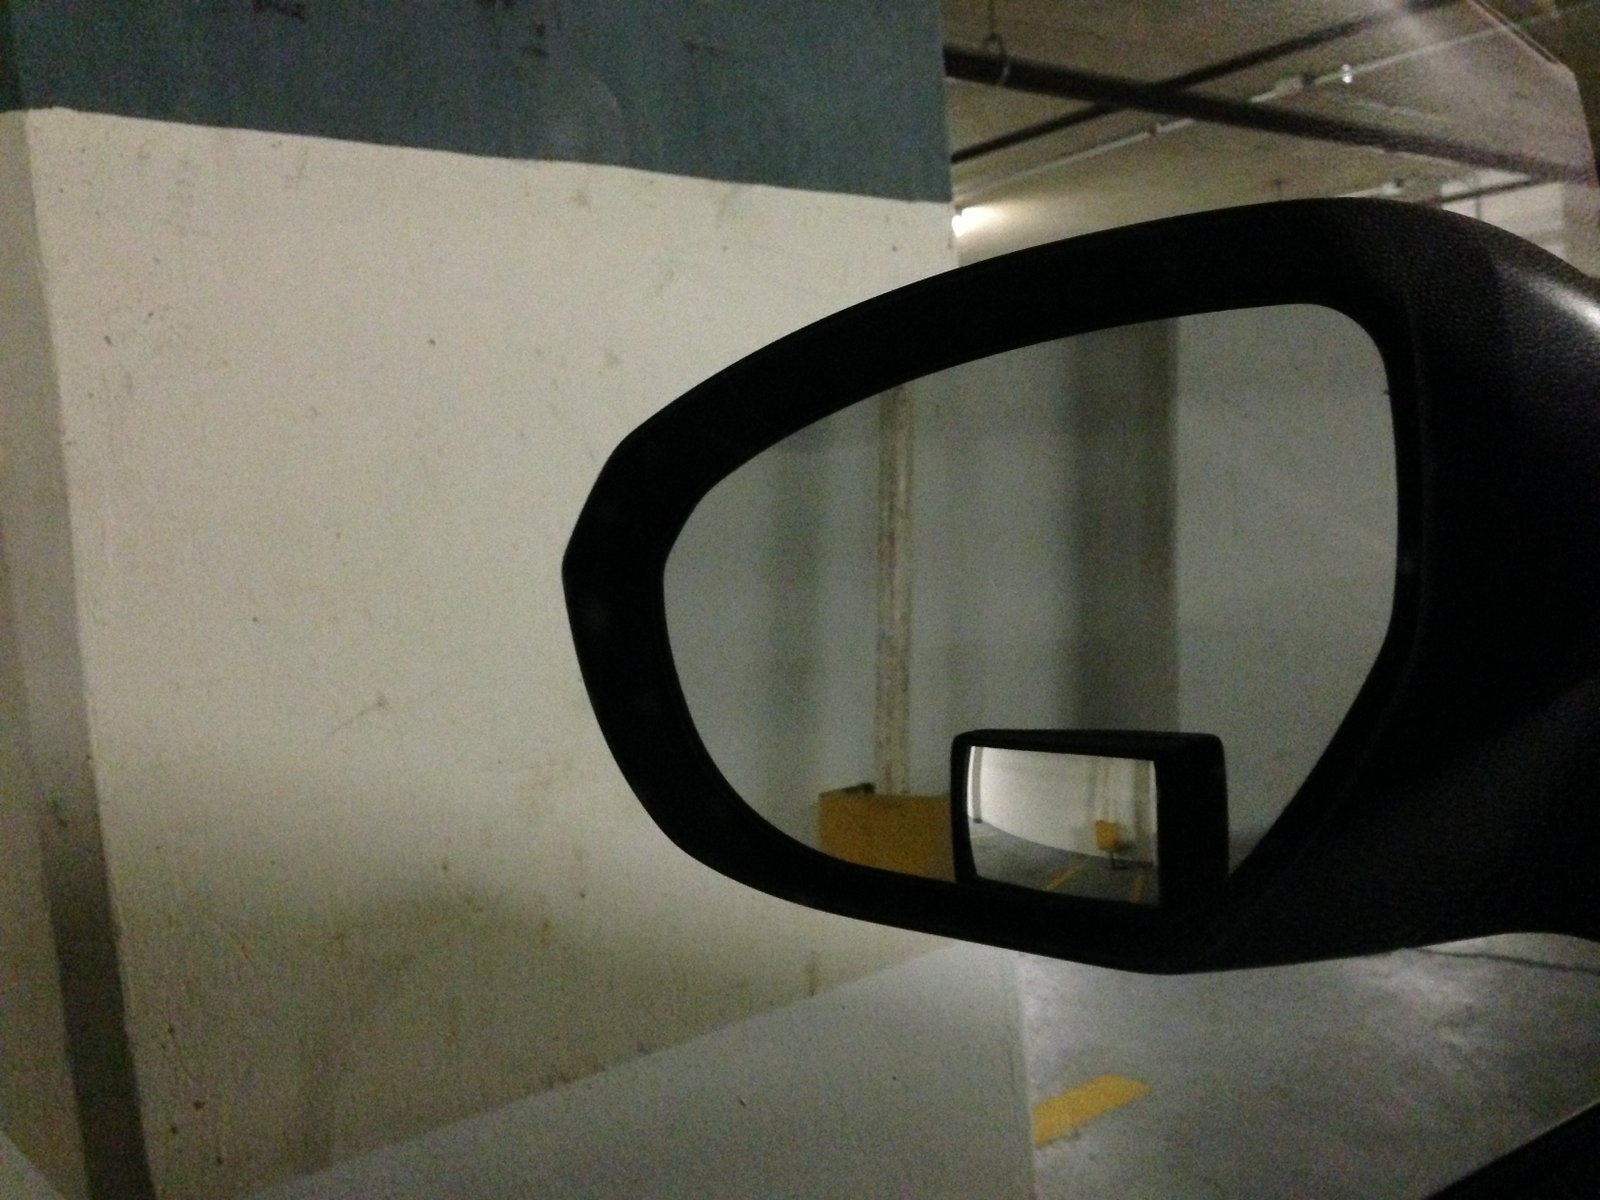 Blind spot mirror. A must-have for me in city traffic.